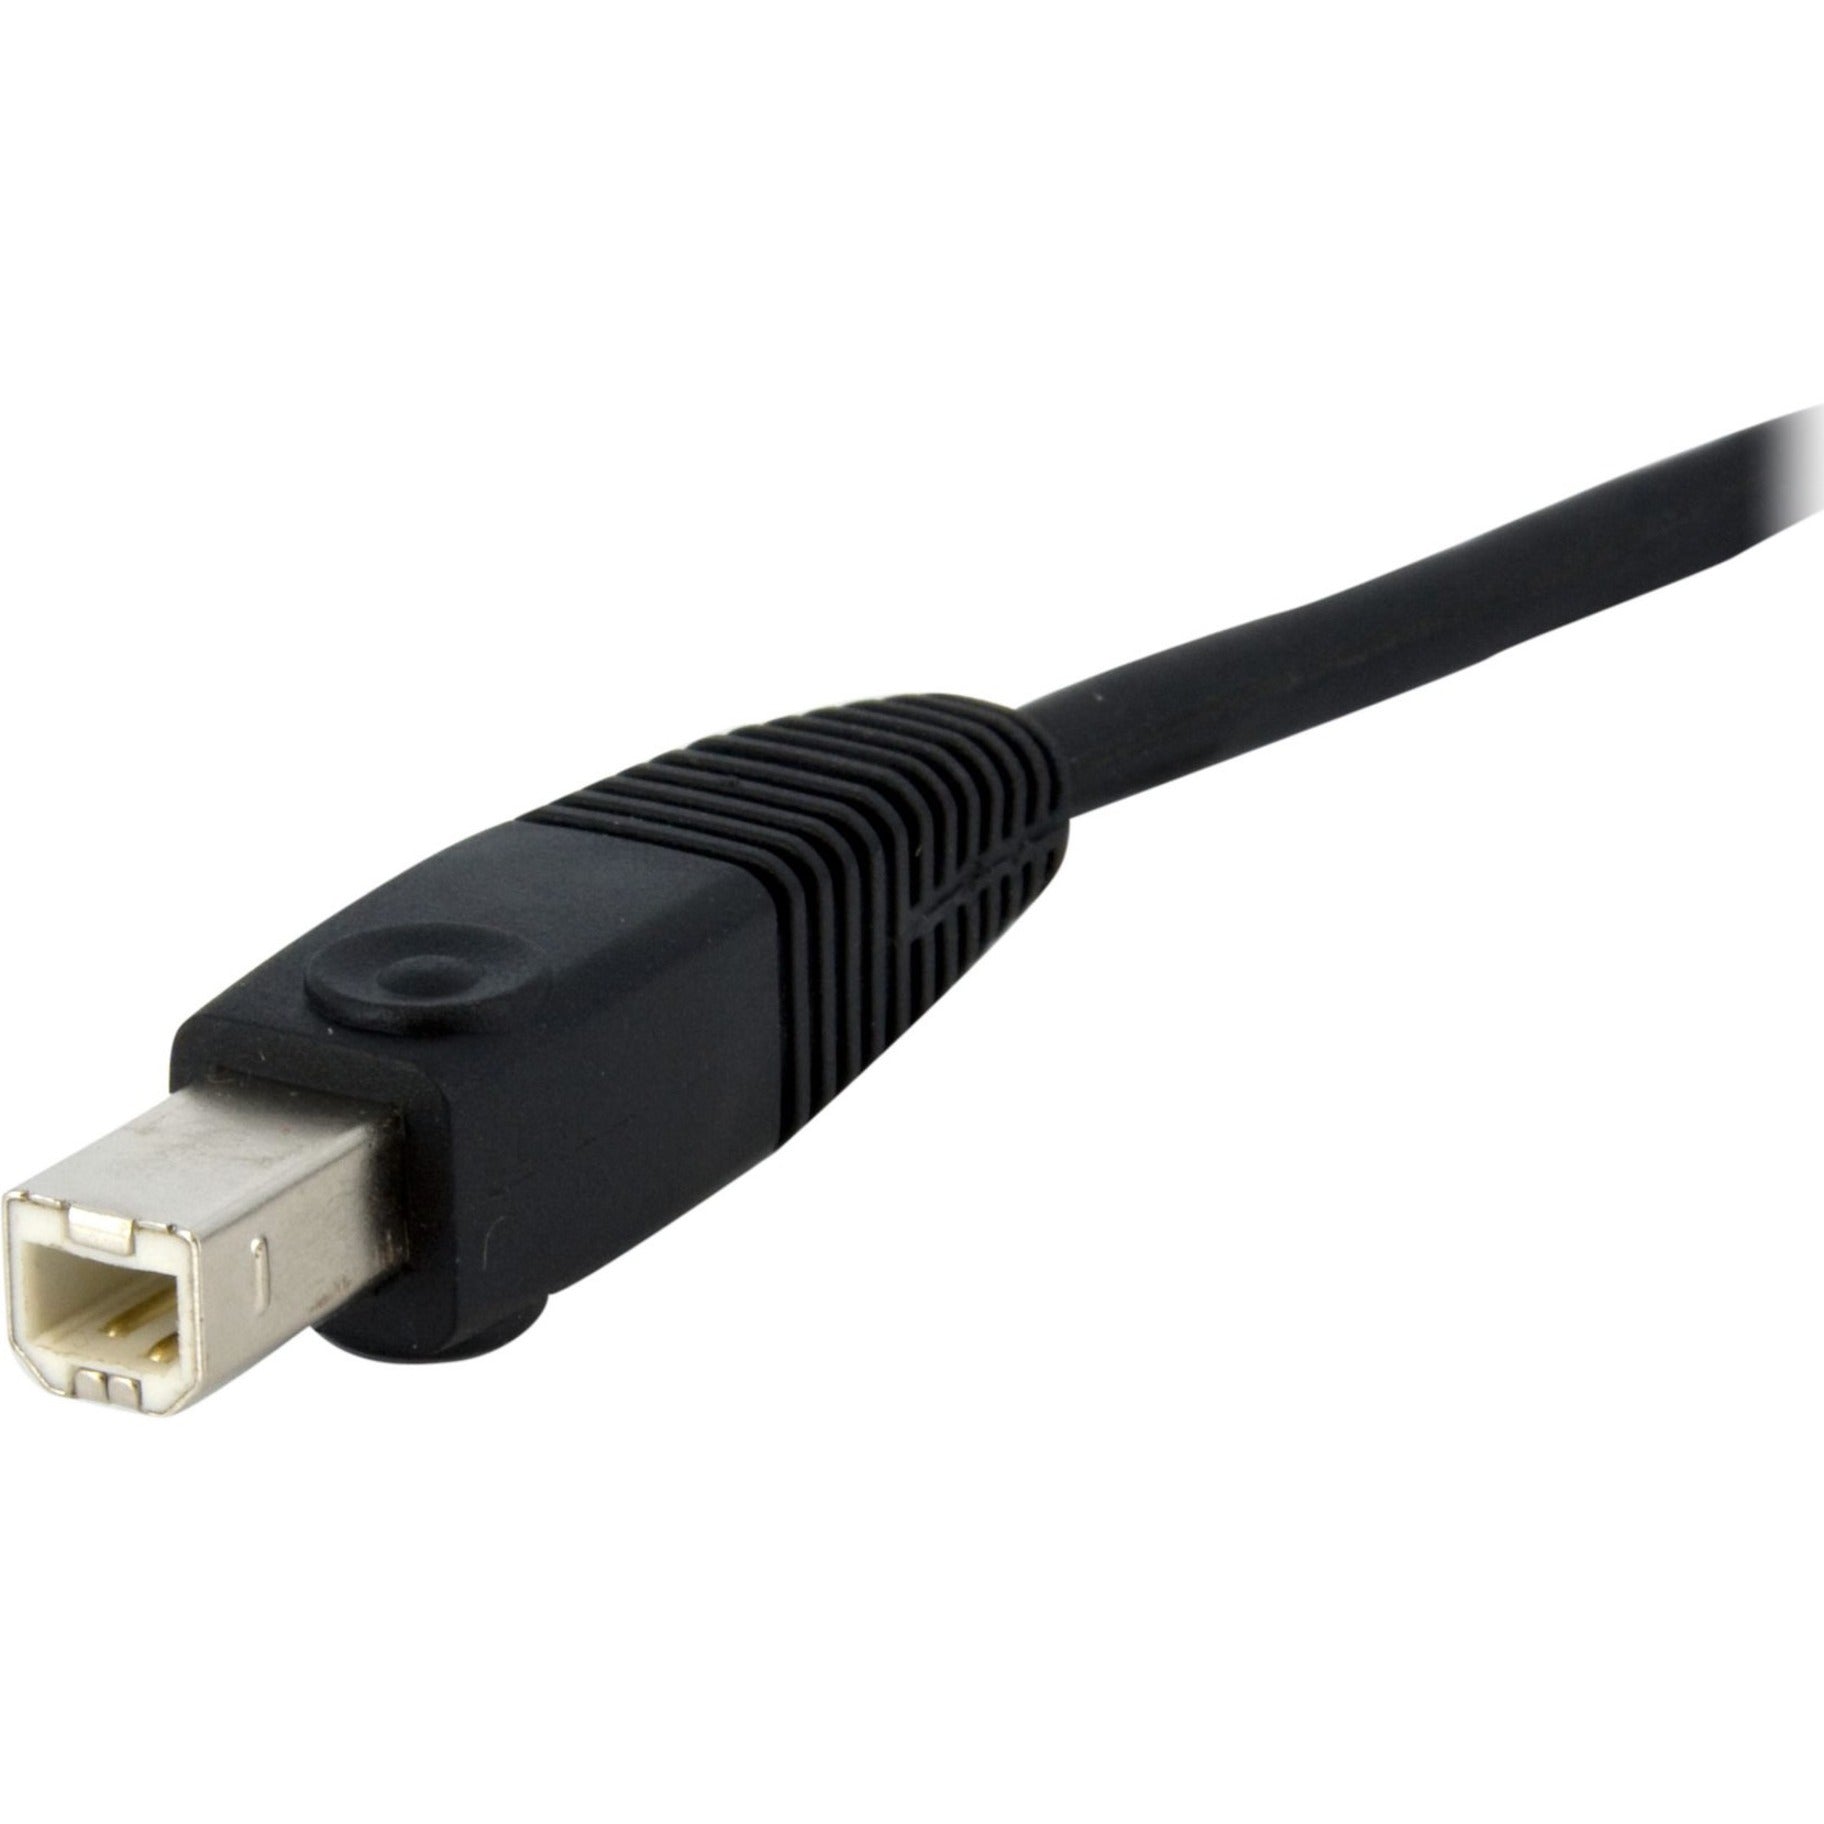 StarTech.com DVID4N1USB6 6ft 4-in-1 USB Dual Link DVI-D KVM Switch Cable with Audio & Microphone, Copper Conductor, 7.9 Gbit/s Data Transfer Rate [Discontinued]